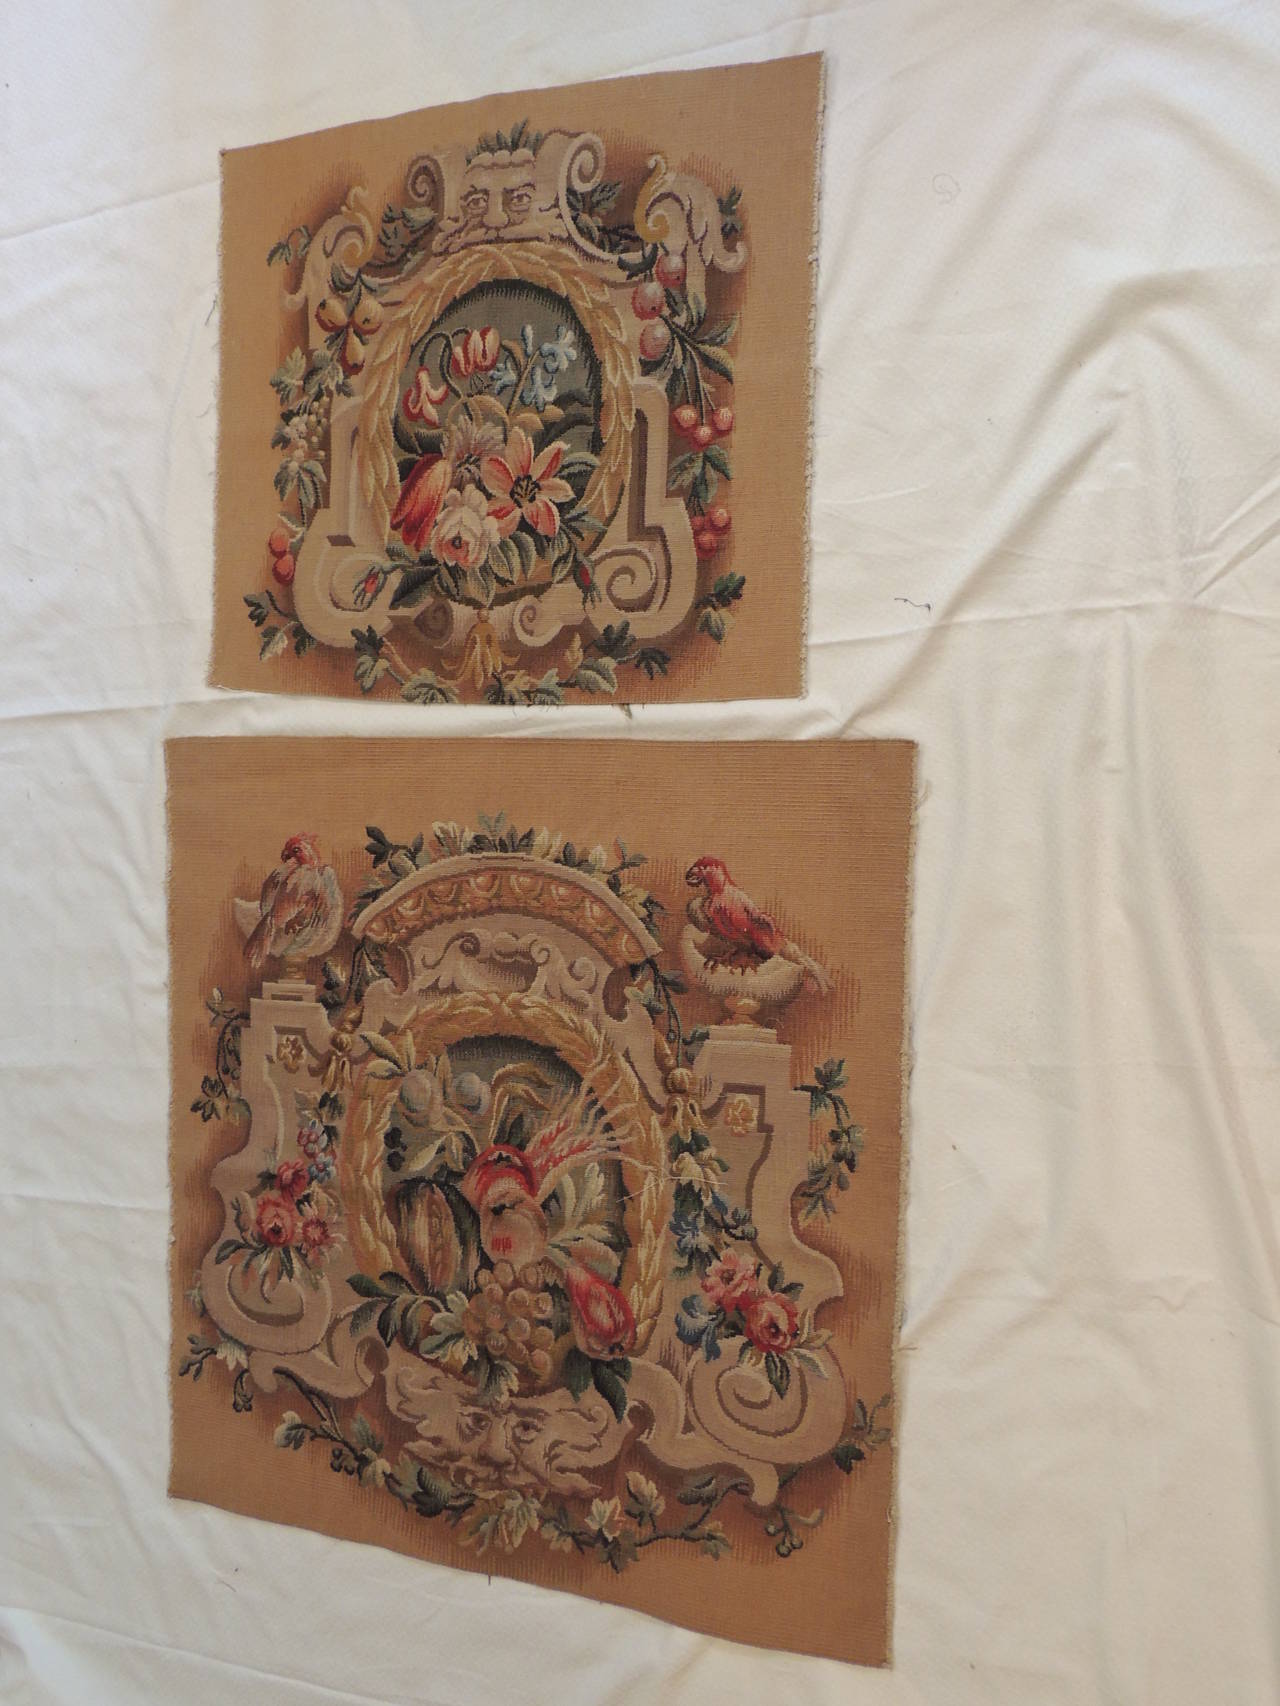 Pair of floral Aubusson tapestry panels depicting Gargoyle, blooming flowers and fruits, birds and berries. Ideal for a chair back and seat upholstery. 
Measures: Small 22 x 25
Large 31 x 32.